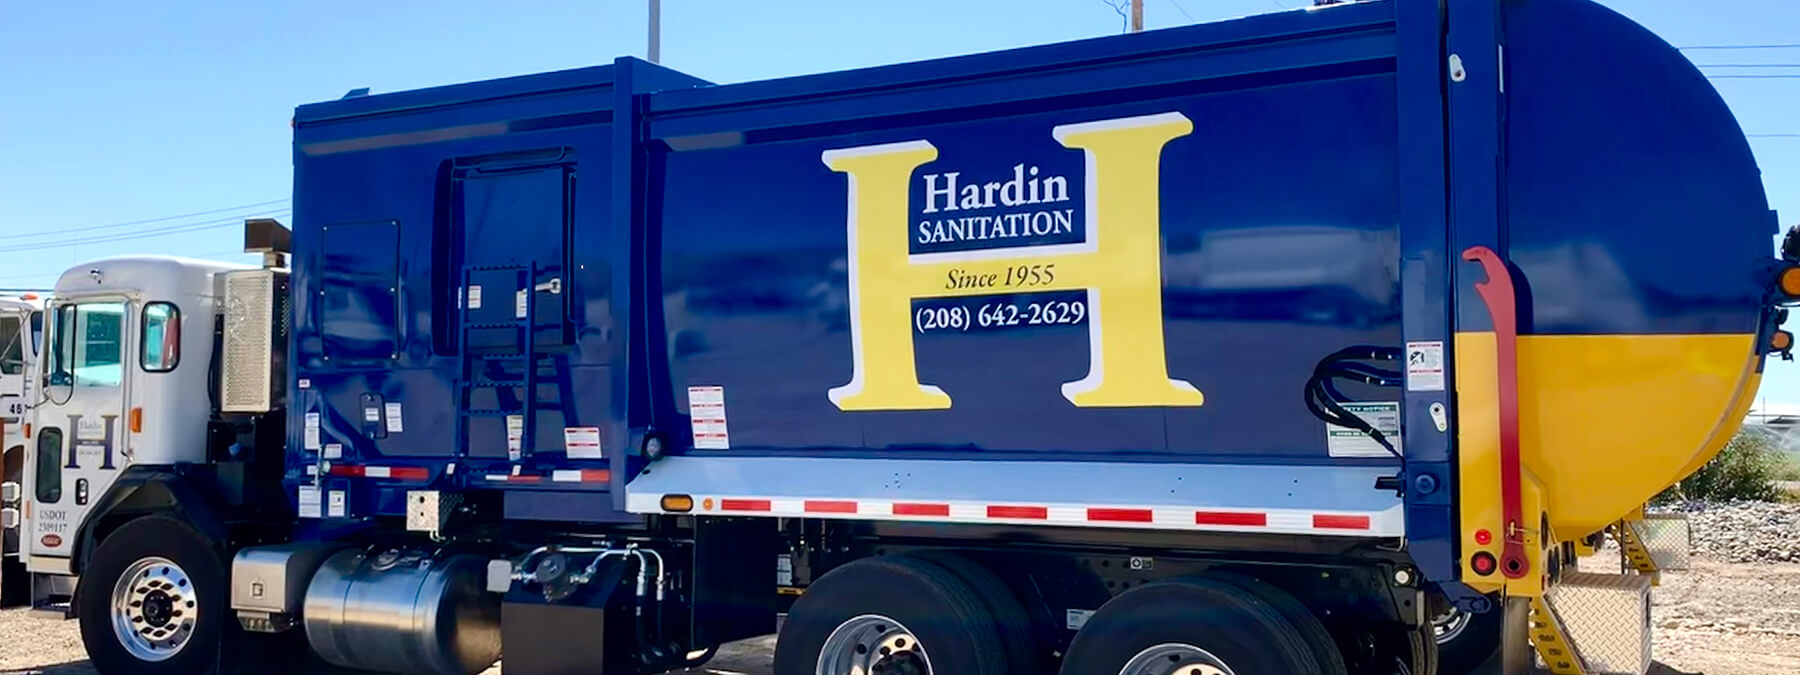 Photo of a Hardin Sanitation Truck driving down a road.